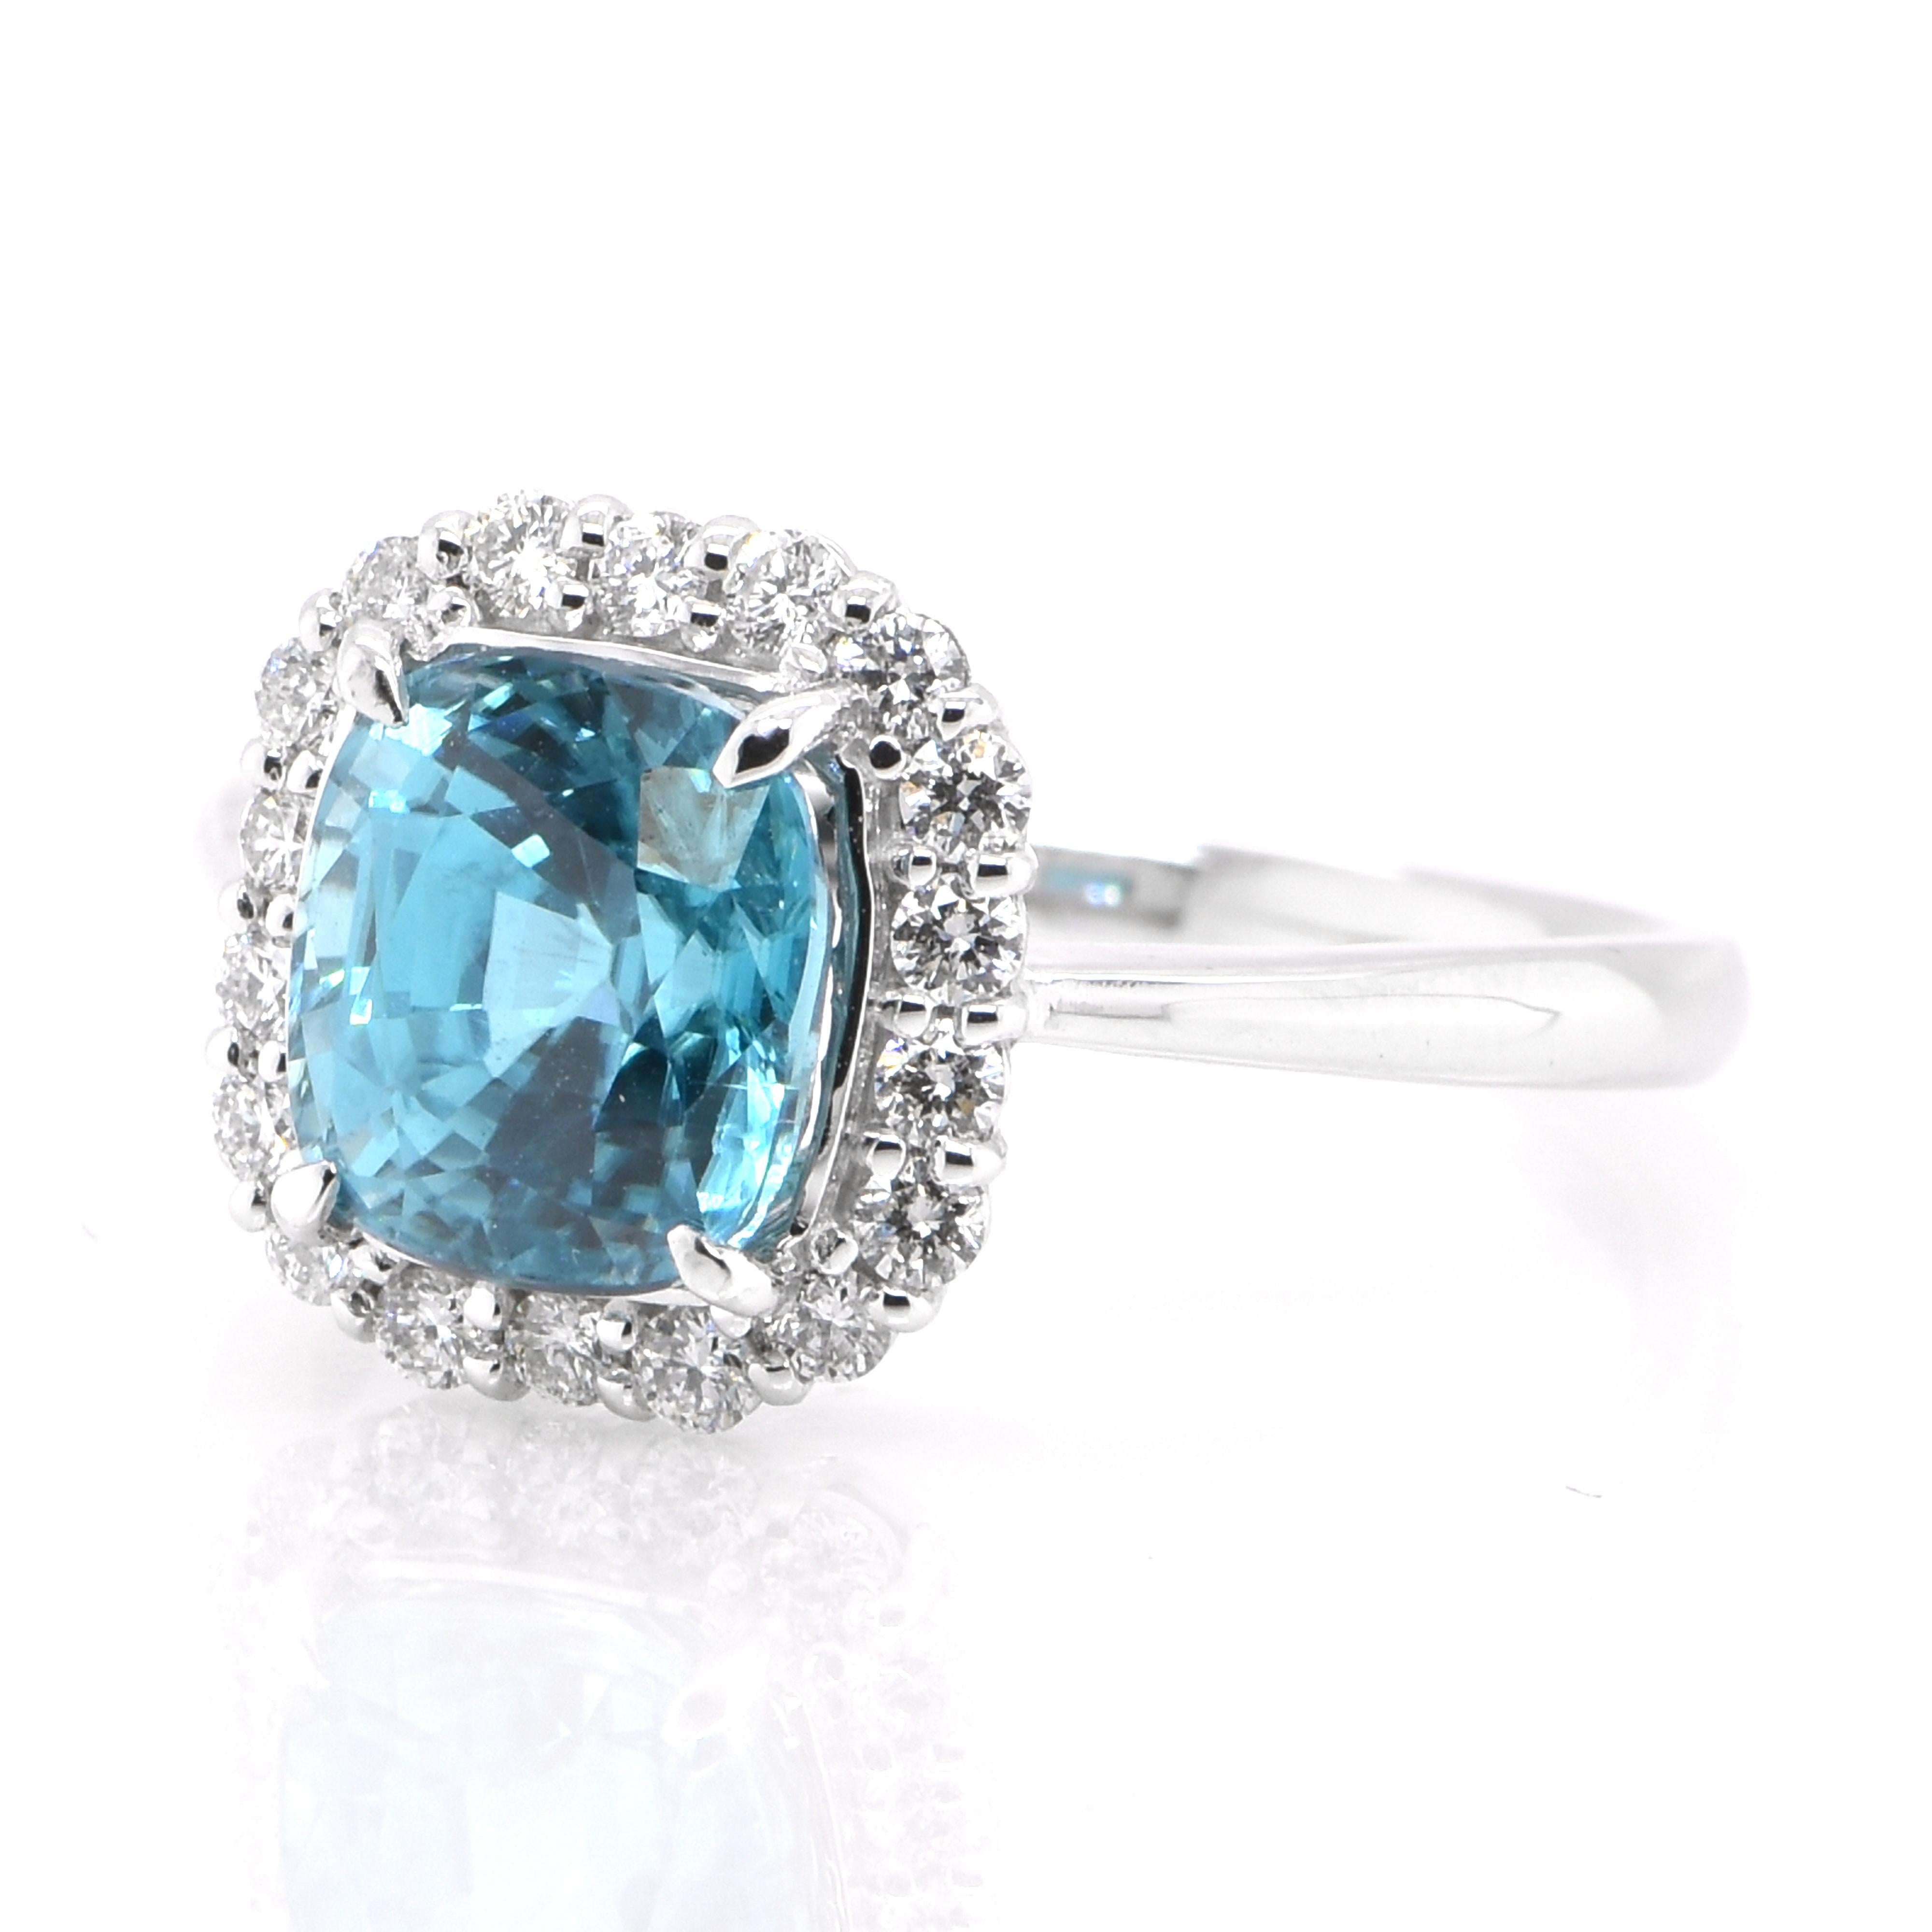 A stunning ring featuring a 3.84 Carat Natural Cambodian Blue Zircon and 0.32 Carats of Diamond Accents set in Platinum. The ring is made in Japan. Ring size and stamping detailed below. Contact Us for more information.   

Ring Size: 13 (Japan), 6